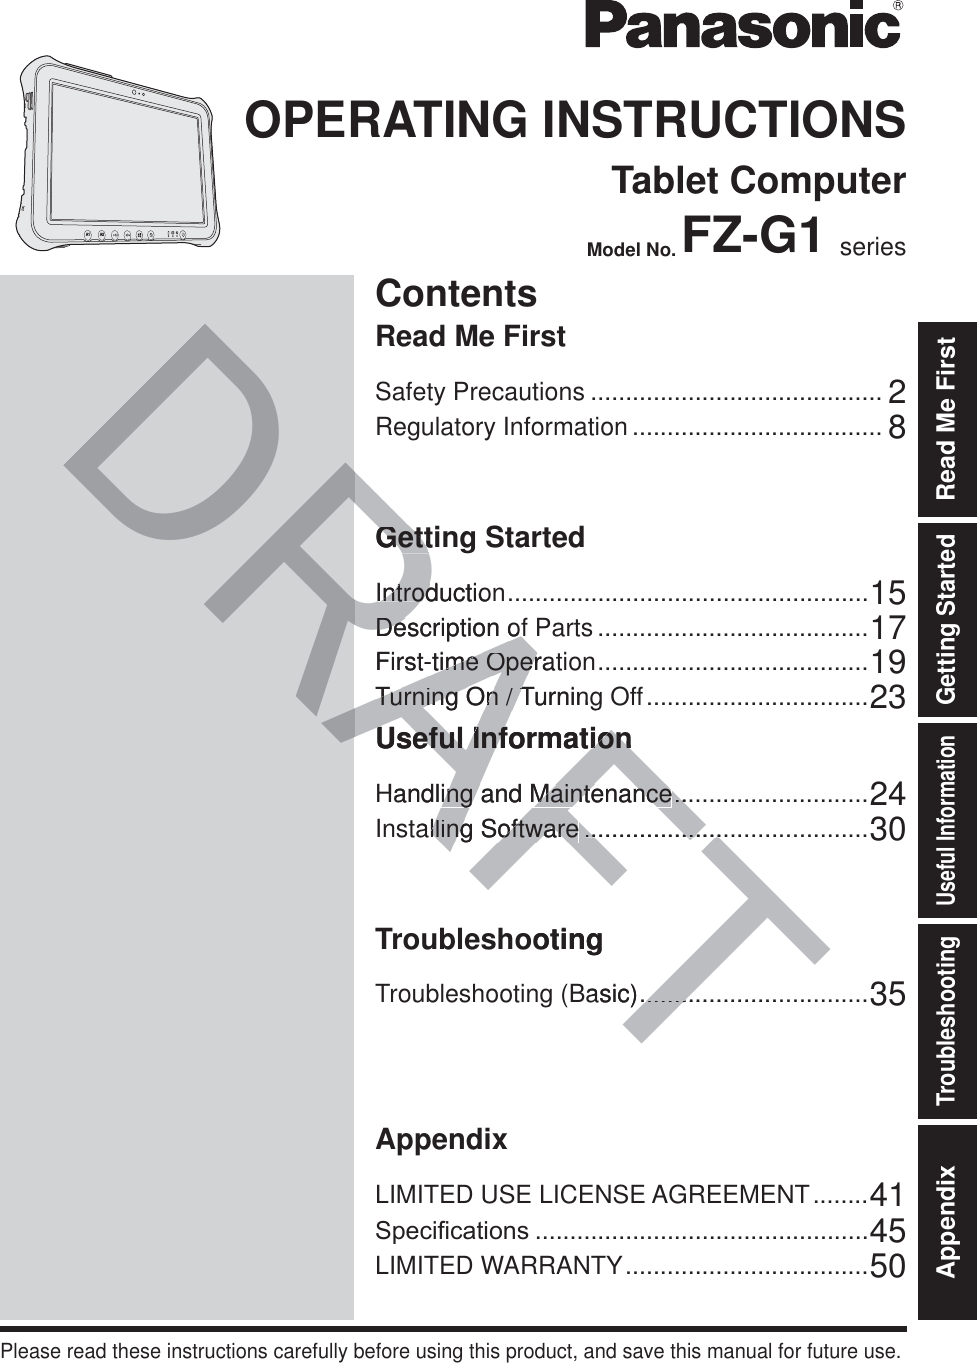 ContentsOPERATING INSTRUCTIONSTablet ComputerModel No. FZ-G1 seriesIntroduction ....................................................15Description of Parts .......................................17First-time Operation .......................................19Turning On / Turning Off ................................23Useful InformationHandling and Maintenance ............................24Installing Software .........................................30TroubleshootingTroubleshooting (Basic) .................................35AppendixLIMITED USE LICENSE AGREEMENT ........416SHFL¿FDWLRQV ................................................45LIMITED WARRANTY ...................................50Please read these instructions carefully before using this product, and save this manual for future use.Getting StartedUseful InformationTroubleshootingAppendix Read Me FirstGetting StartedSafety Precautions .......................................... 2Regulatory Information .................................... 8Read Me FirstA2A1RAFTDRAIntroductioIntrodDescription ofDescription ofFirst-time Operat-time OperTurning On / TurningTurning On / TUseful InformationUseful InformationHandling and Maintenanceing and Maintenance....alling Softwarelling Software........................................ootingBasic)..........................GettiGett